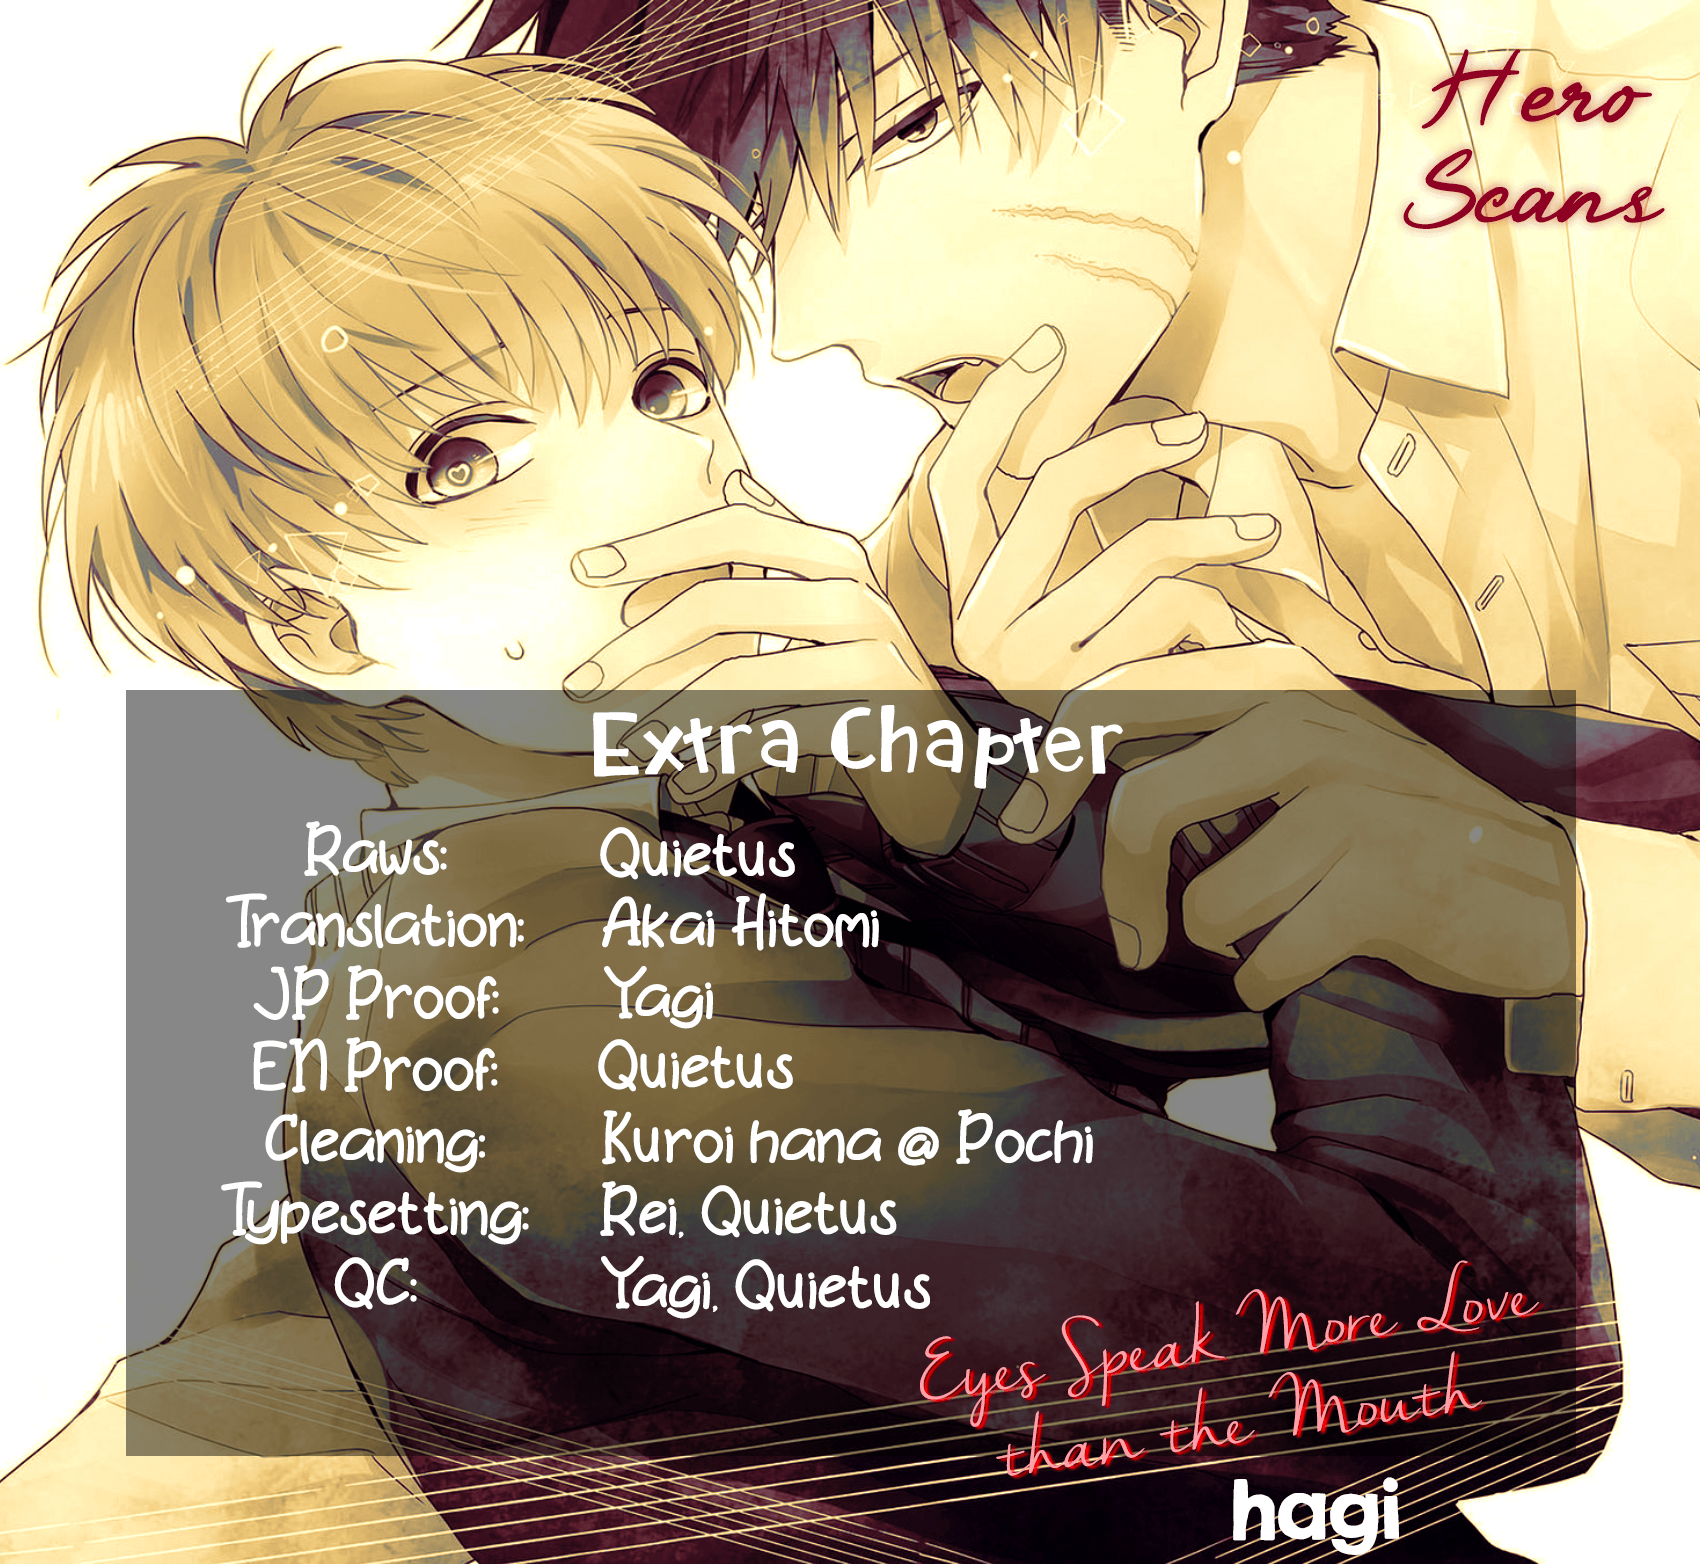 Eyes speak more love than the mouth - chapter 4.5 - #3